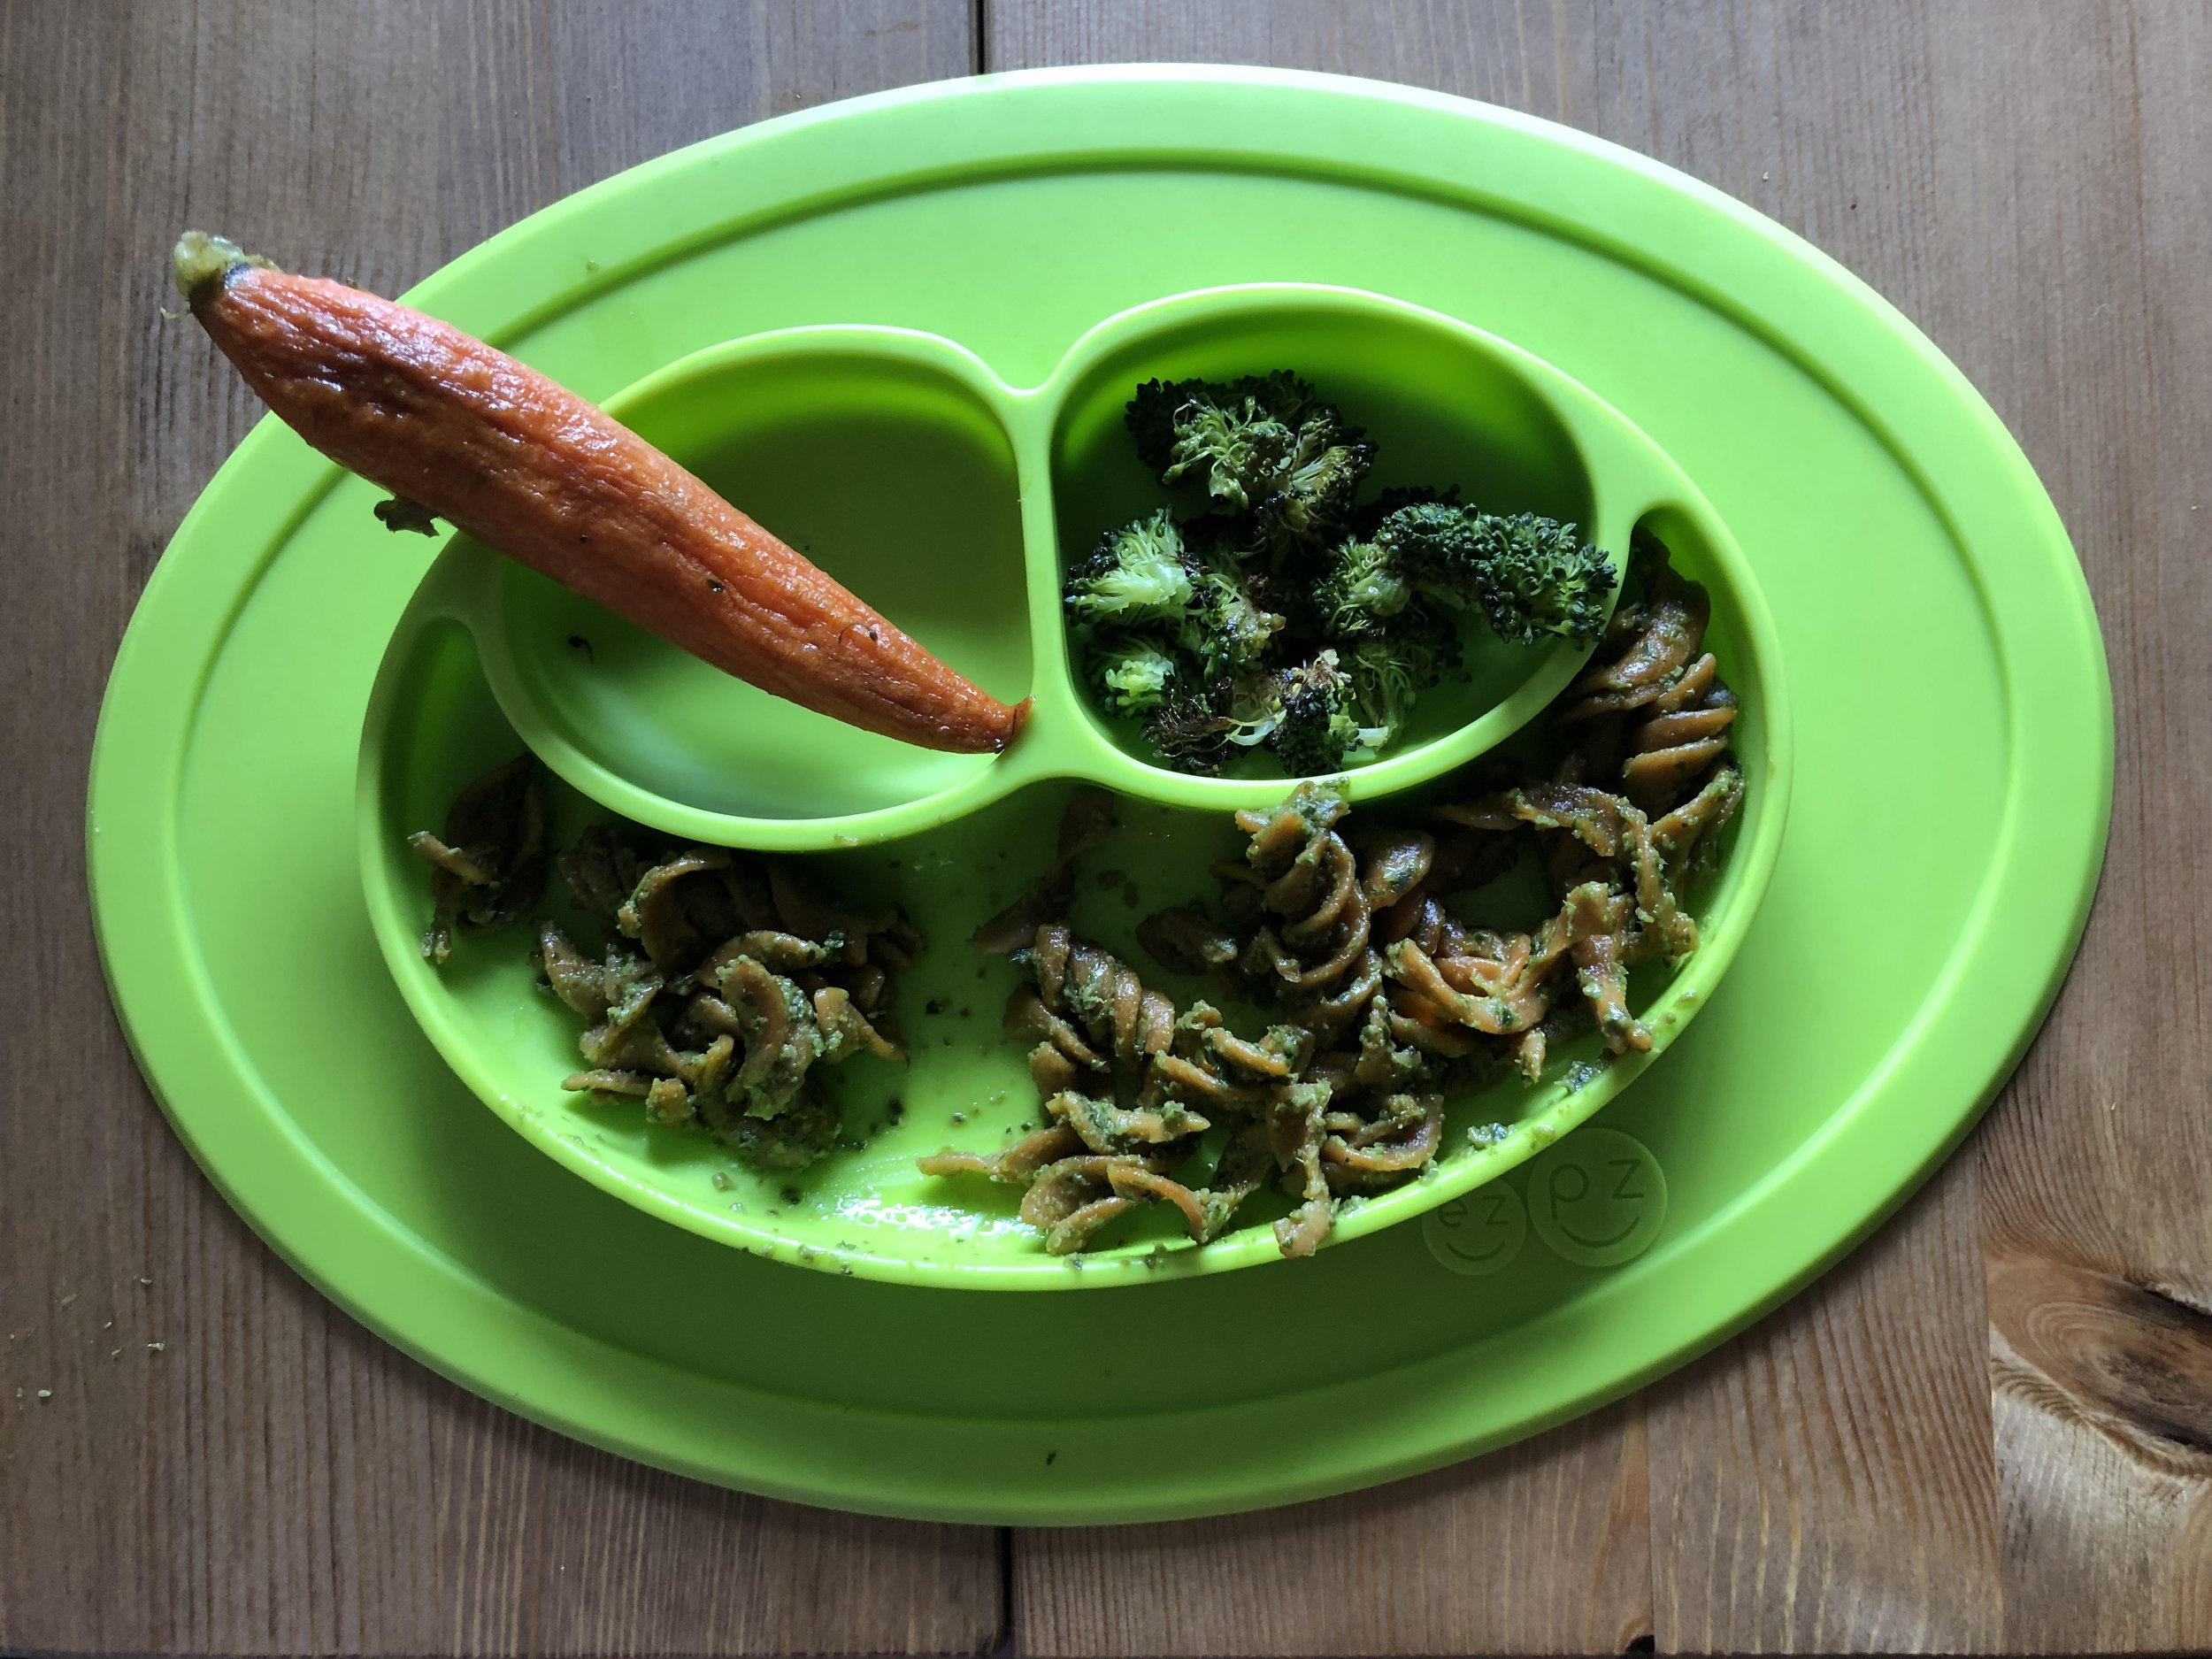 Cybeles pasta with vegan pesto with roasted broccoli and fancy carrots